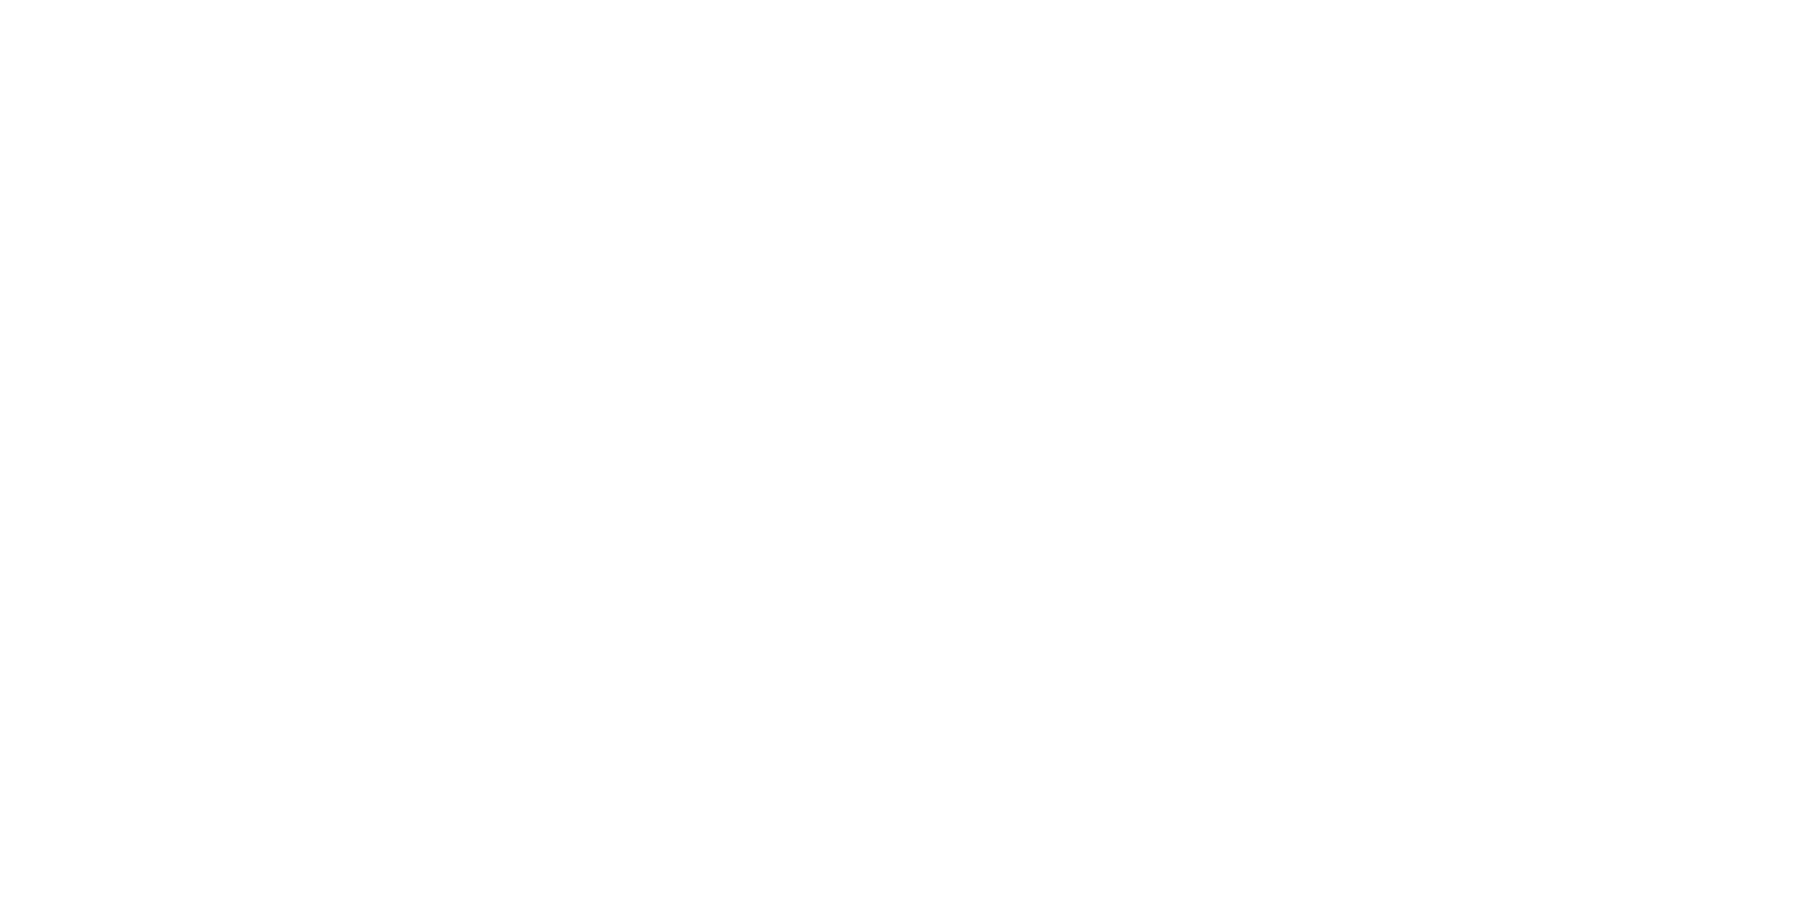 Outshined Photography LLC